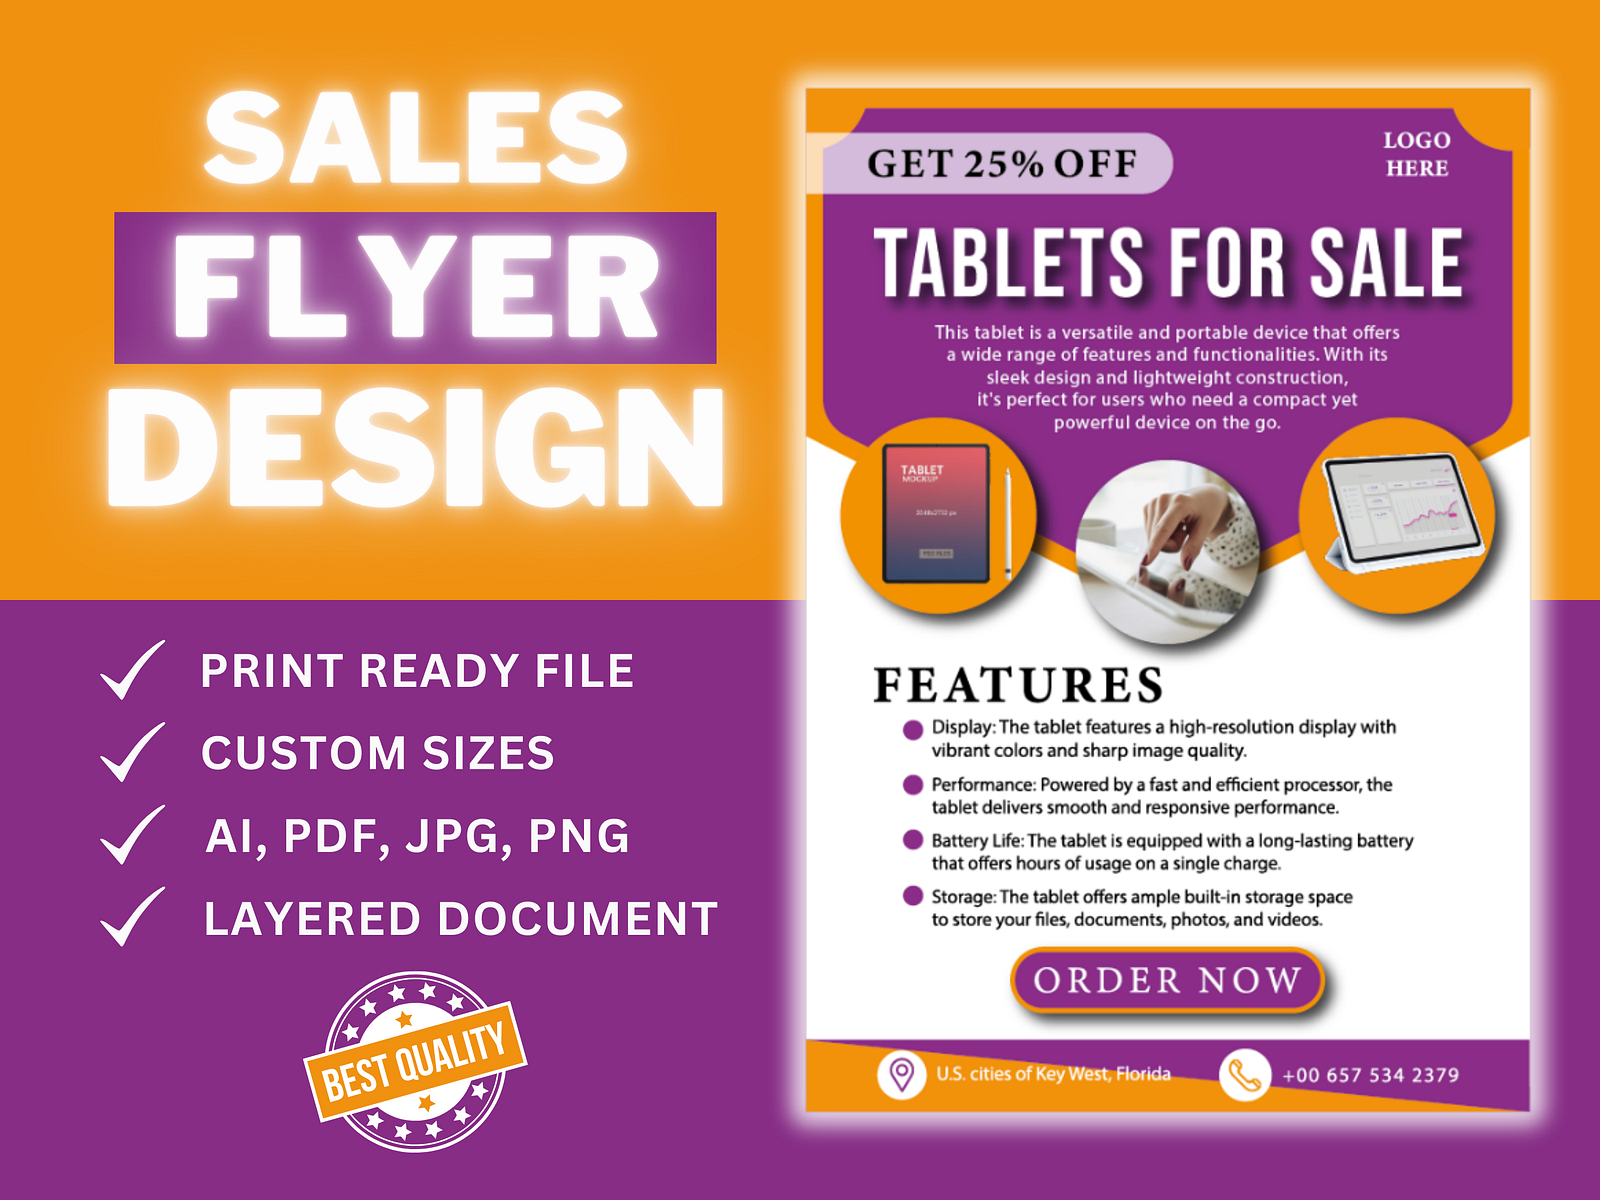 Creative Sales Flyer Design To Get More Product Sales by Med Azaroual ...